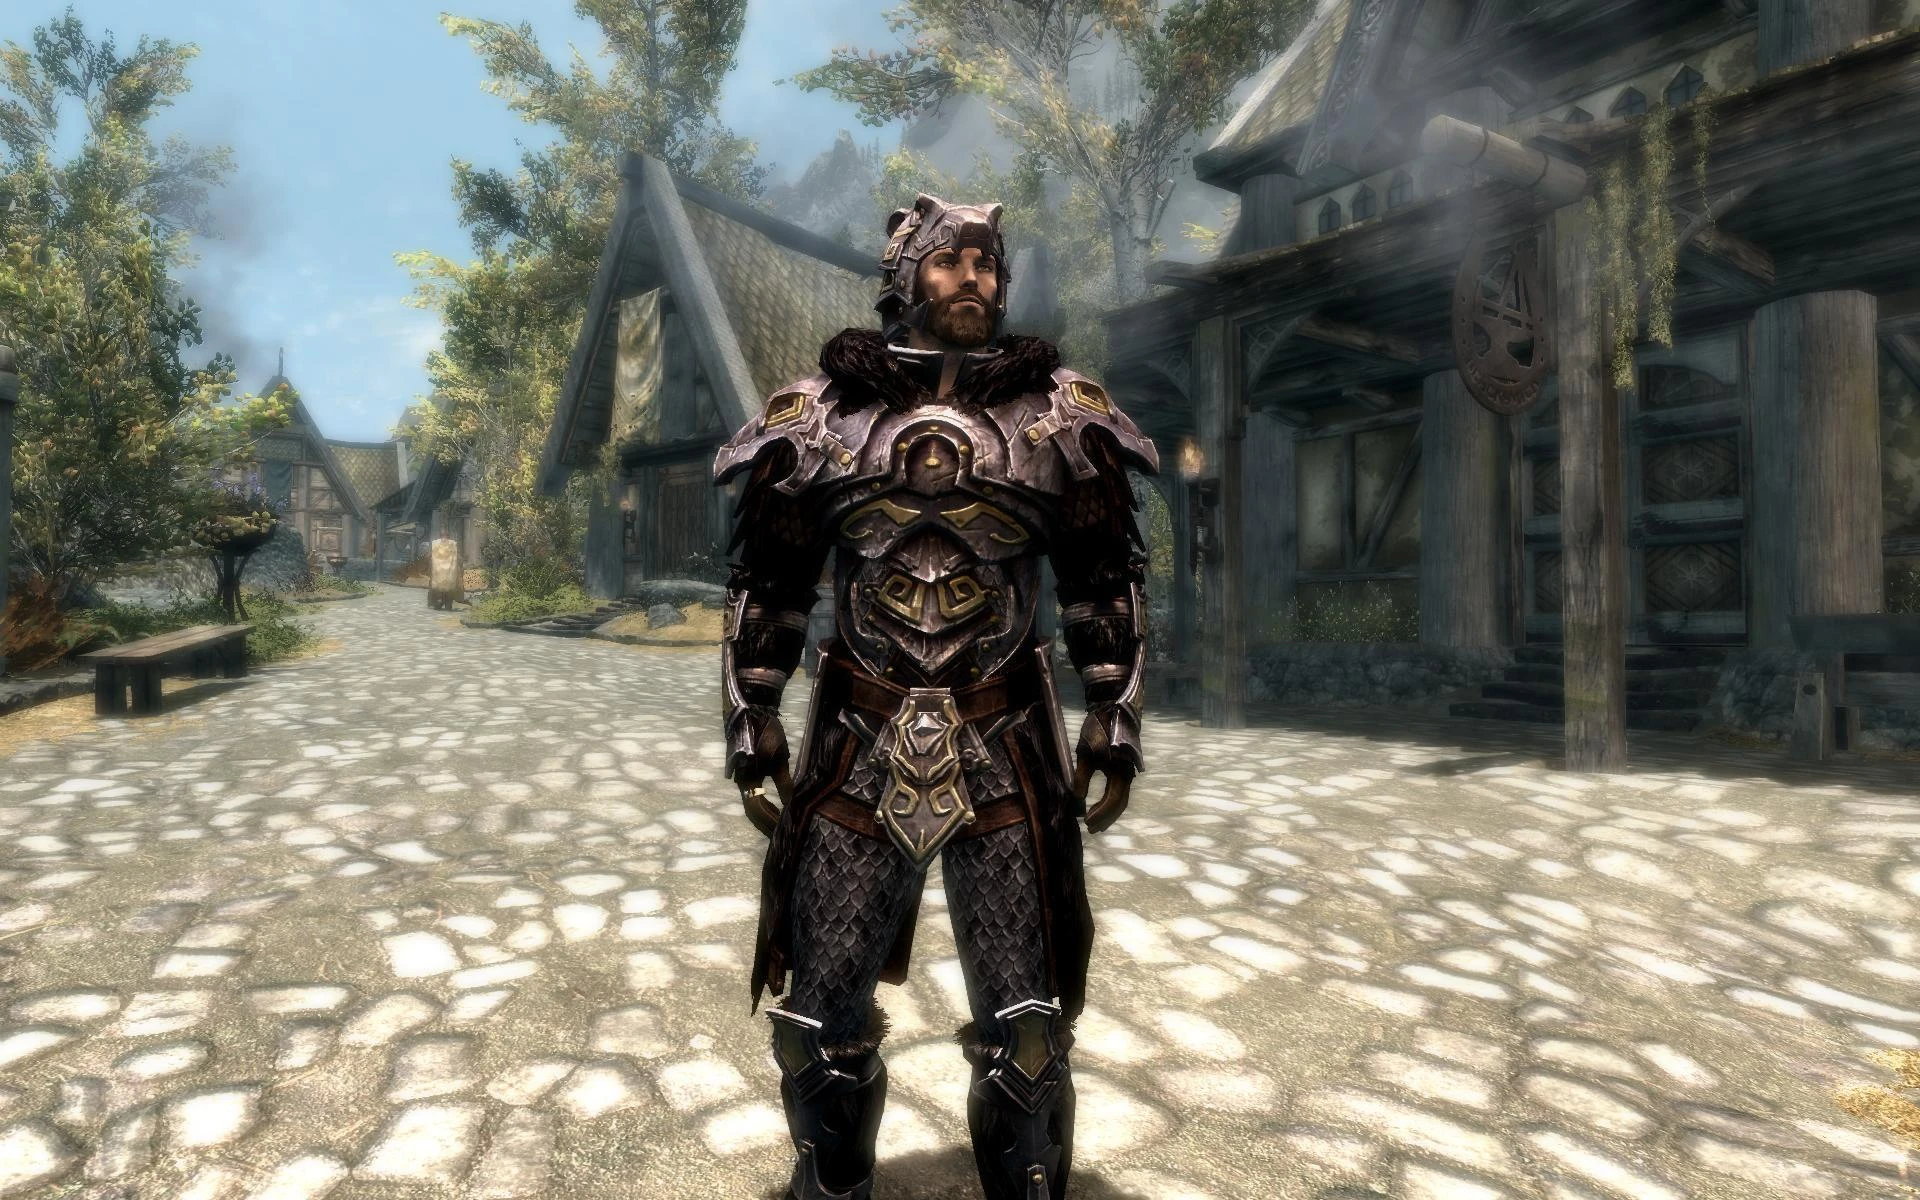 Gilded Nordic Carved Armor At Skyrim Nexus Mods And.